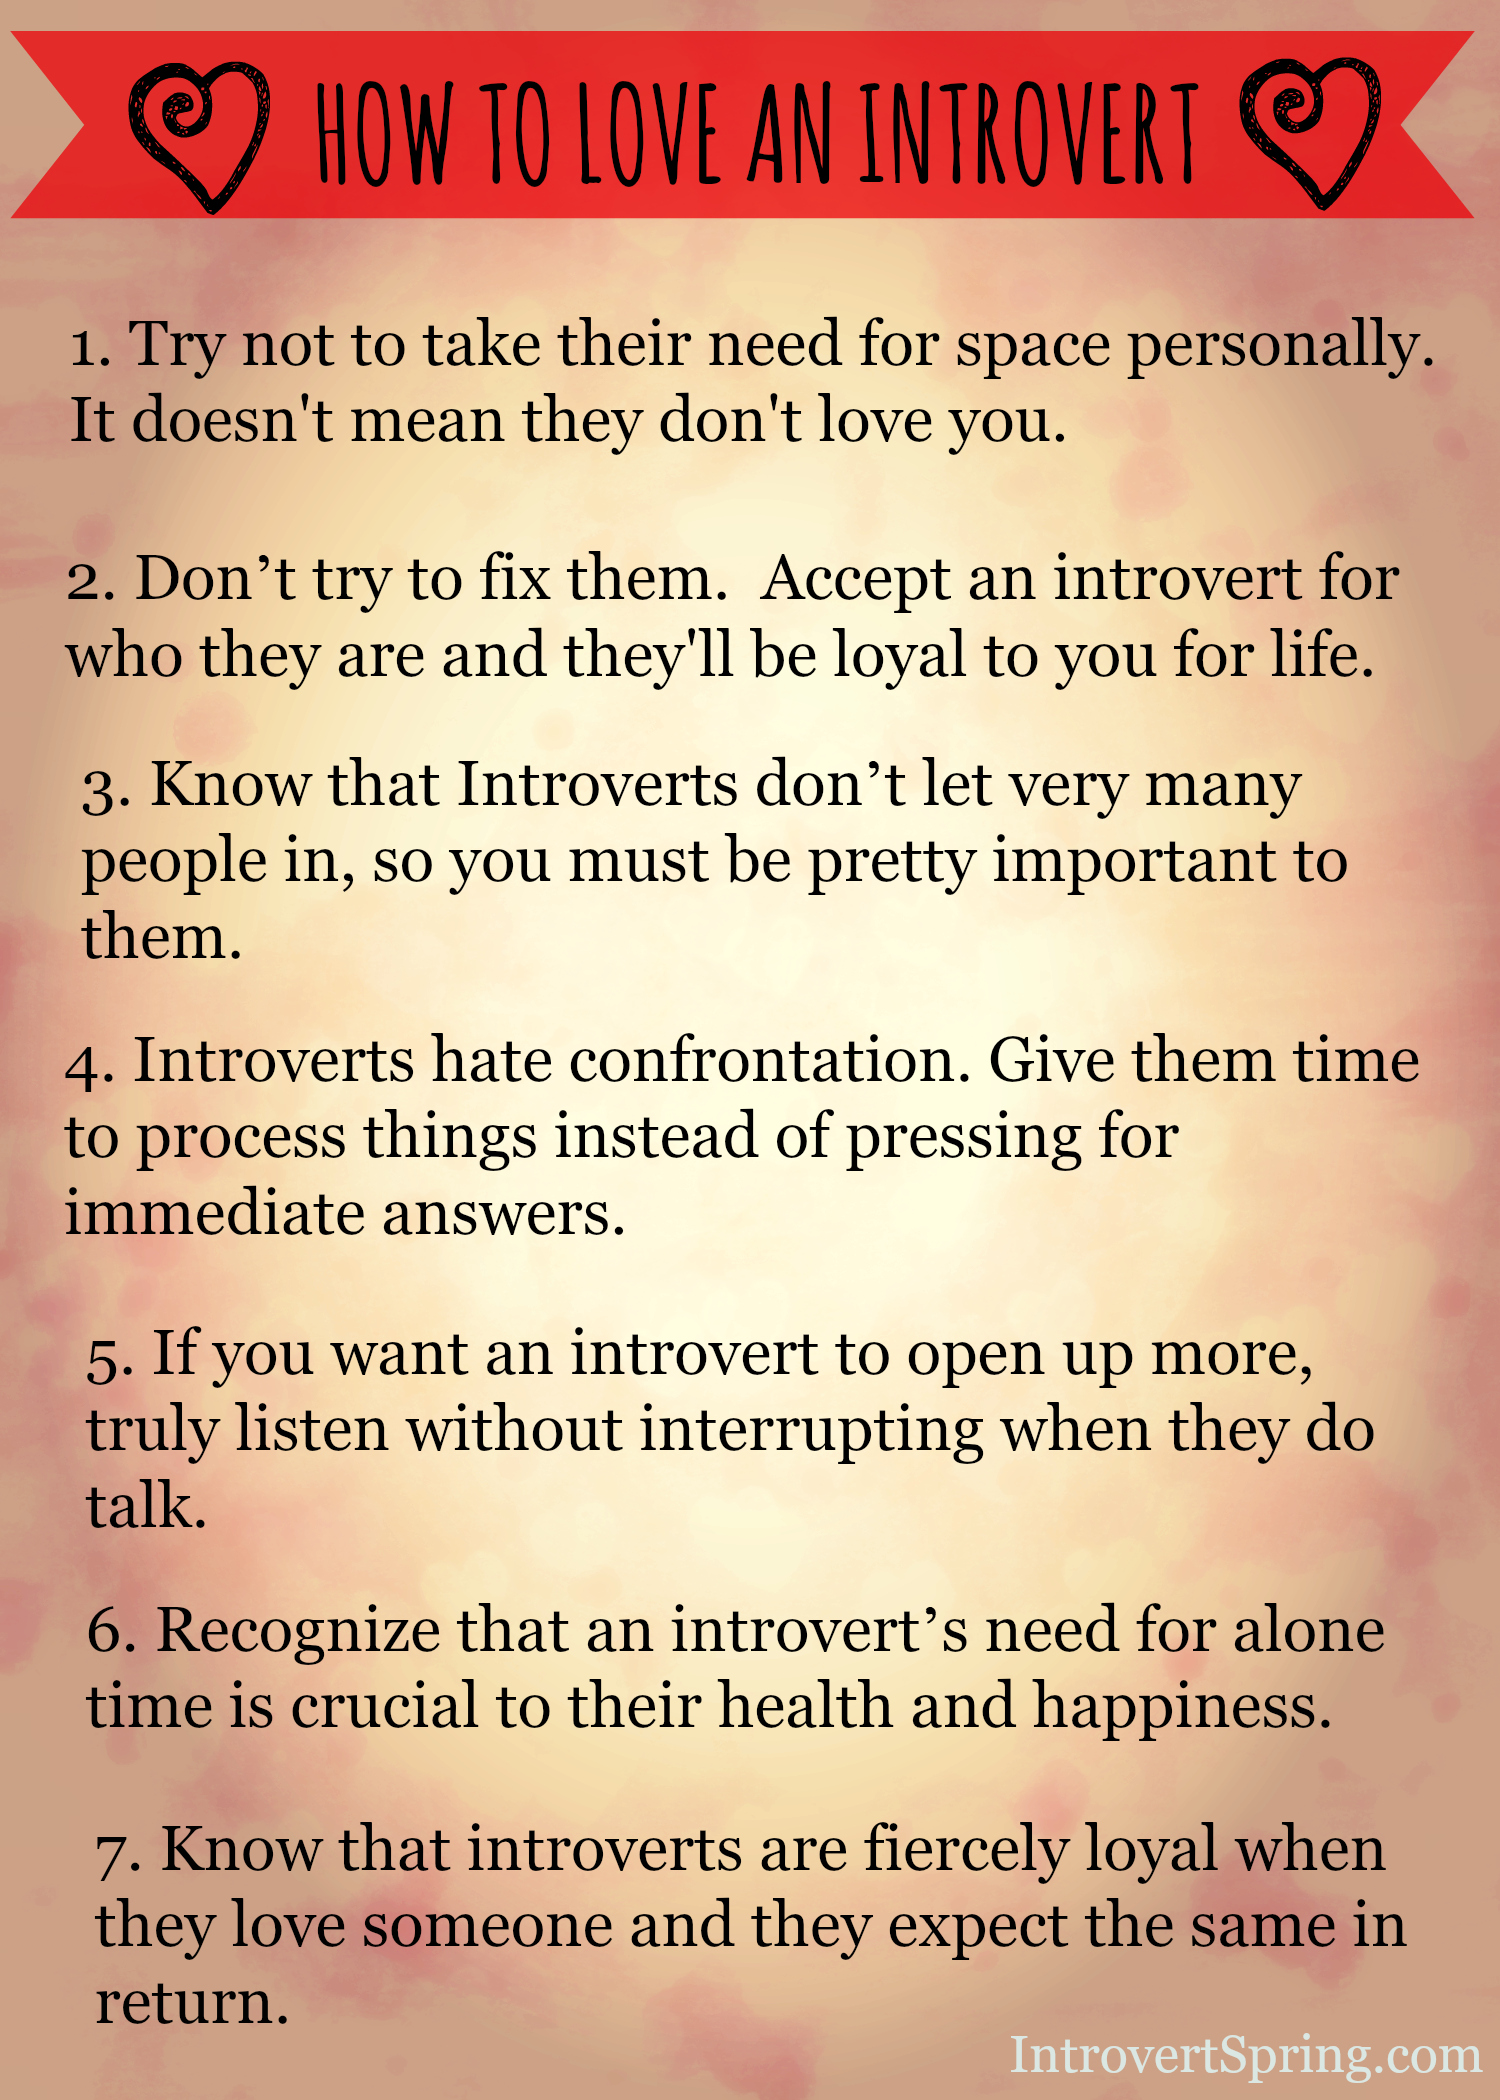 How to talk to an introvert girl